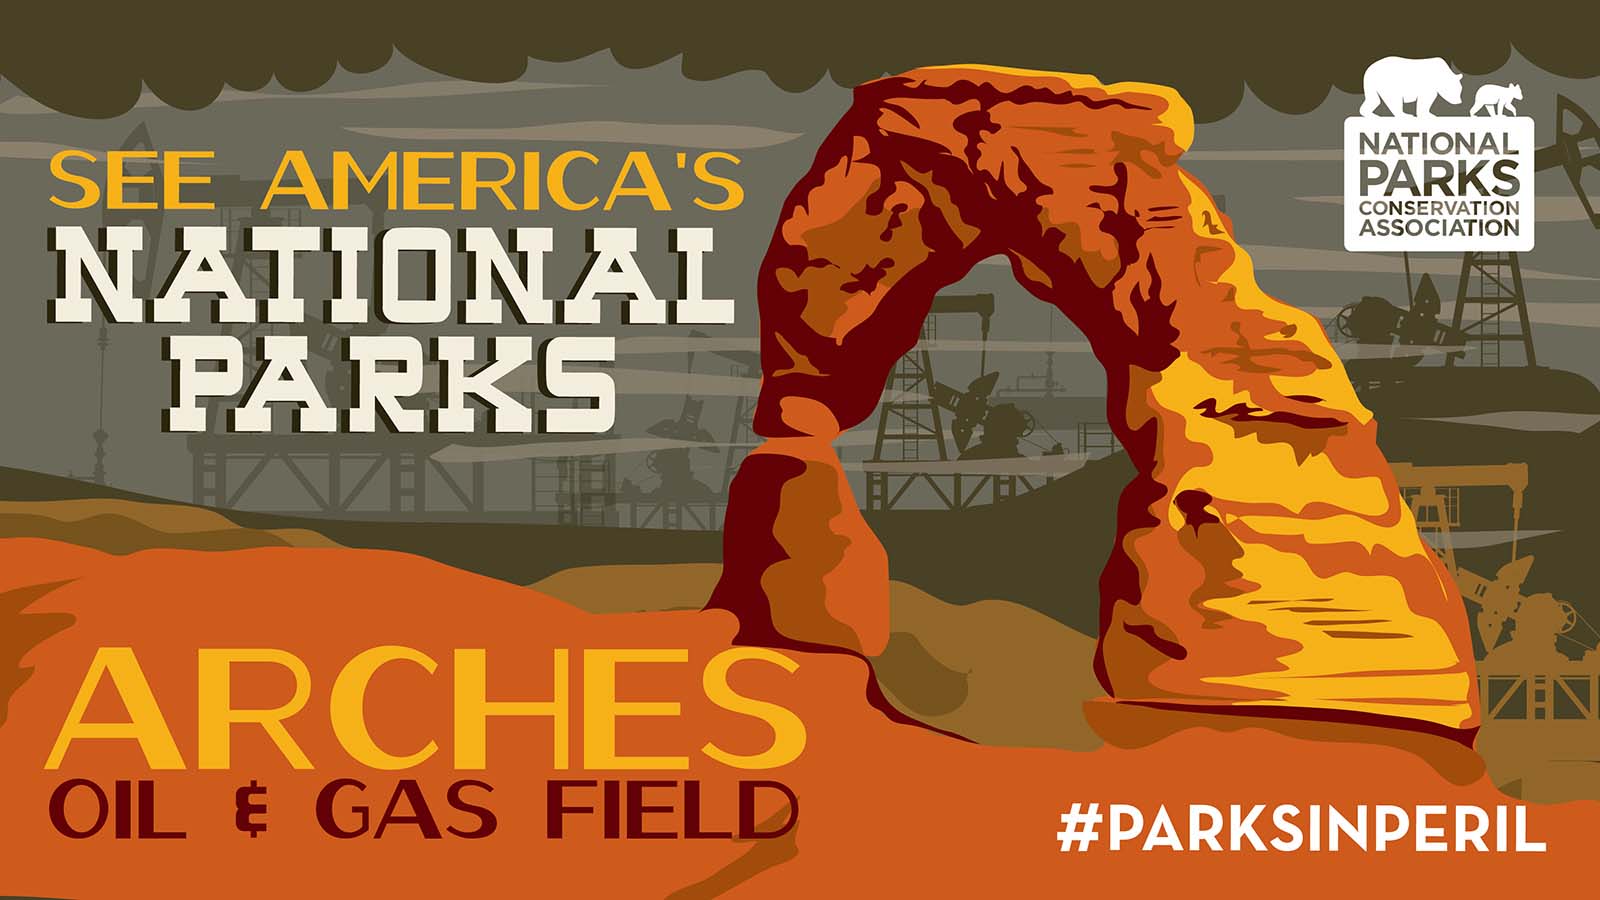 What if you hiked all the way to the park’s famous Delicate Arch and gazed out to see … oil pumps?